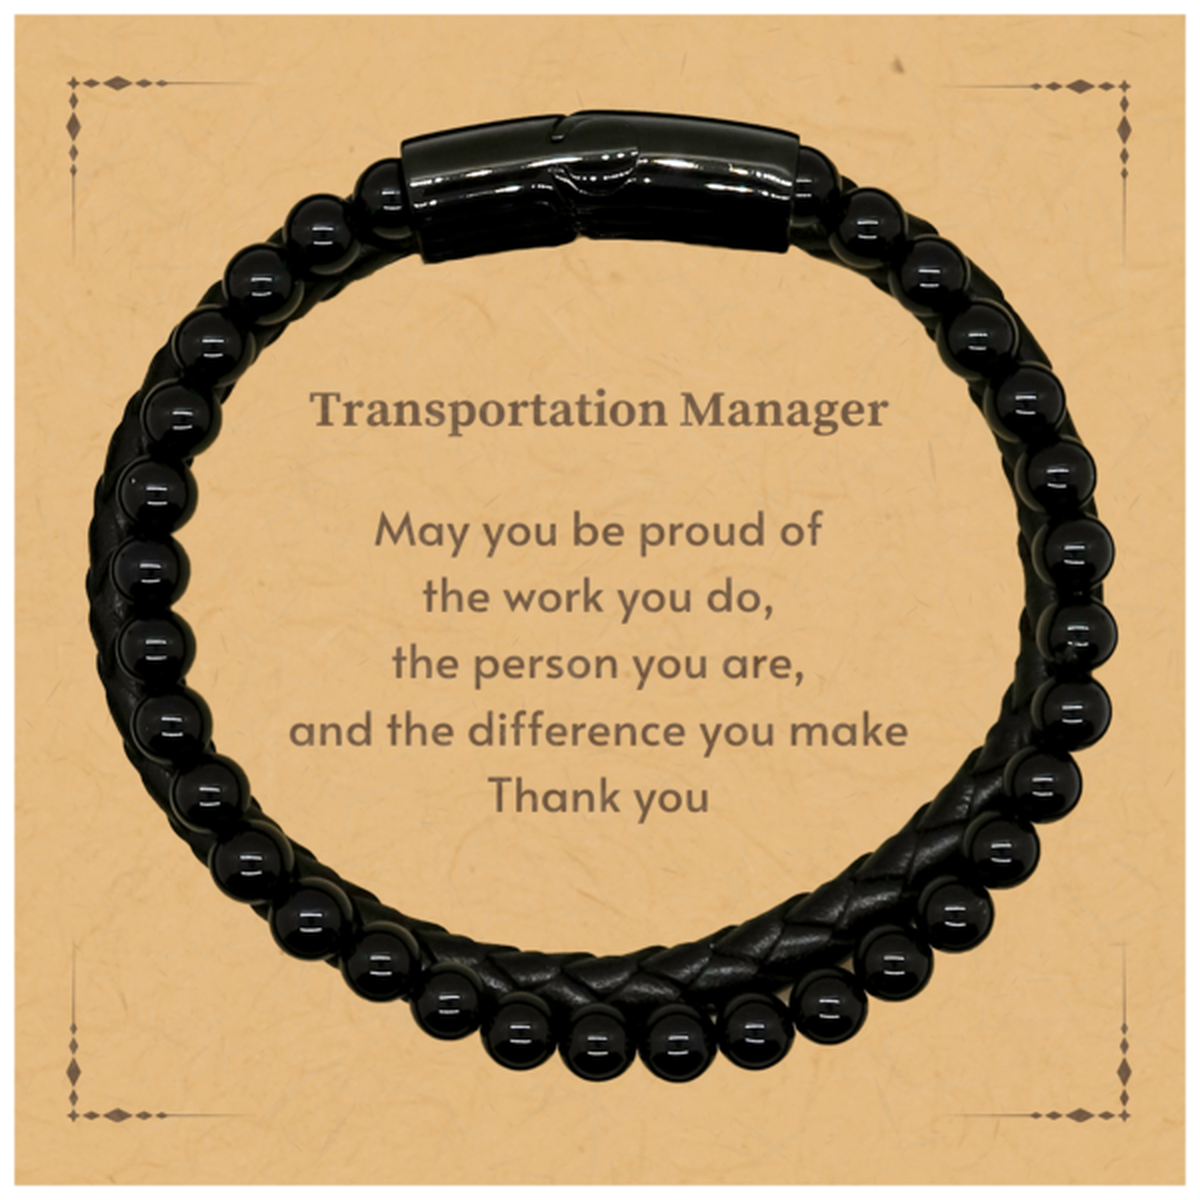 Heartwarming Stone Leather Bracelets Retirement Coworkers Gifts for Transportation Manager, Transportation Manager May You be proud of the work you do, the person you are Gifts for Boss Men Women Friends